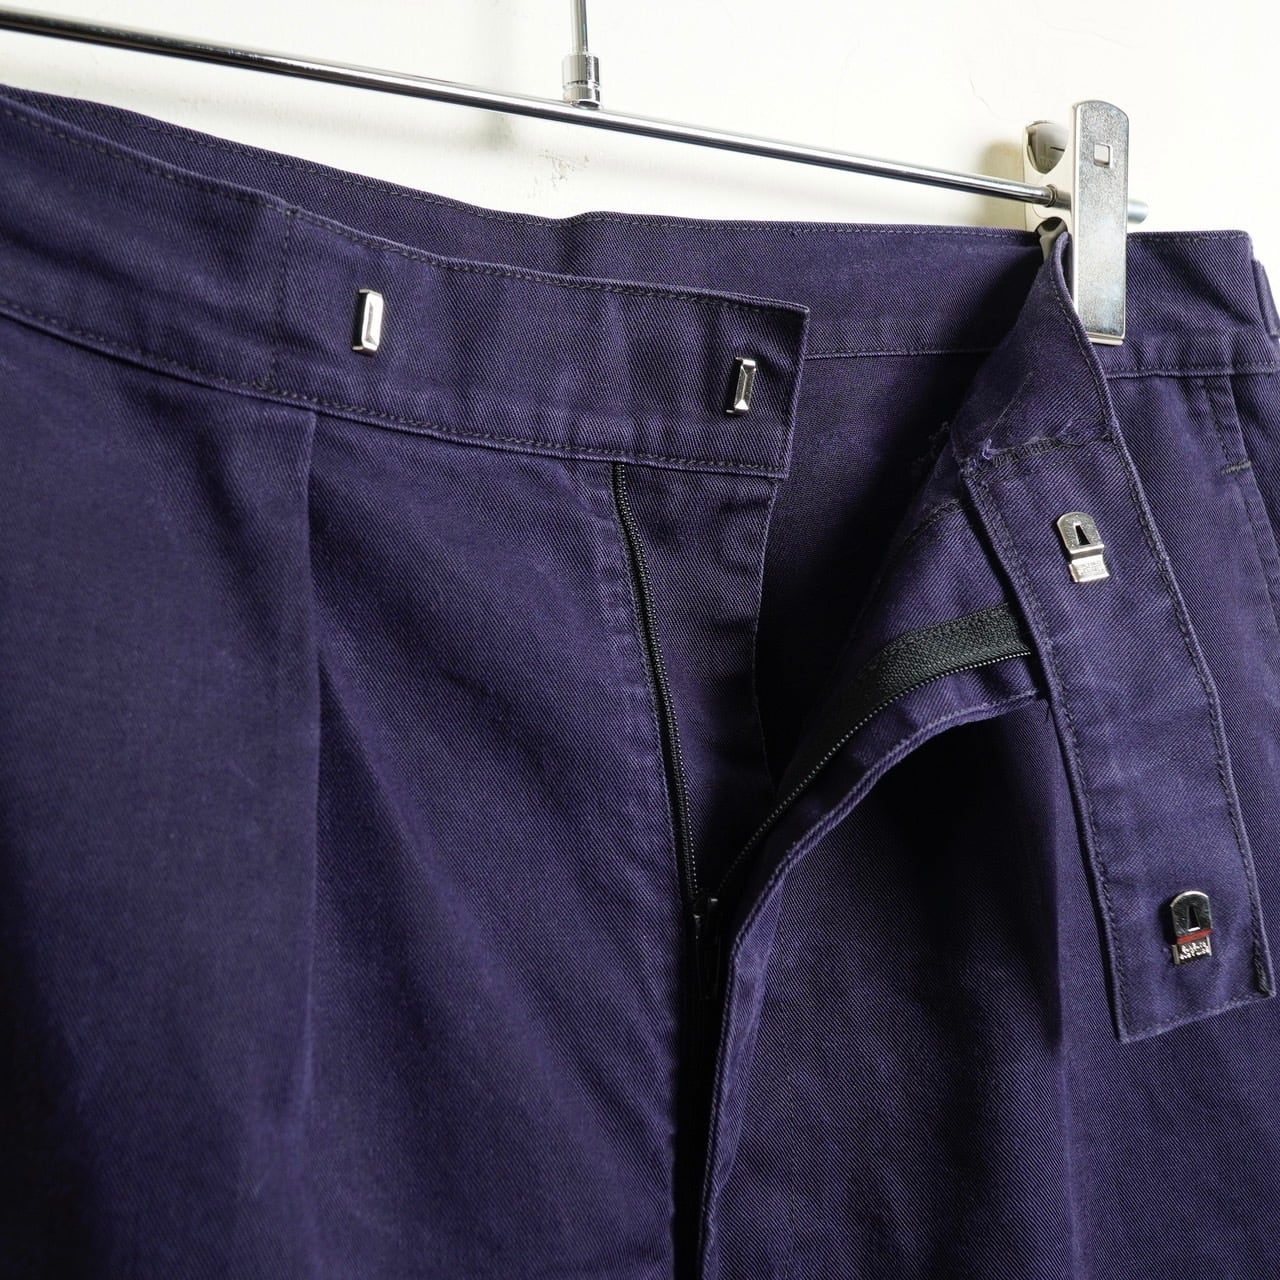 Royal Navy Working Dress Trousers | AMICI used vintage clothing store